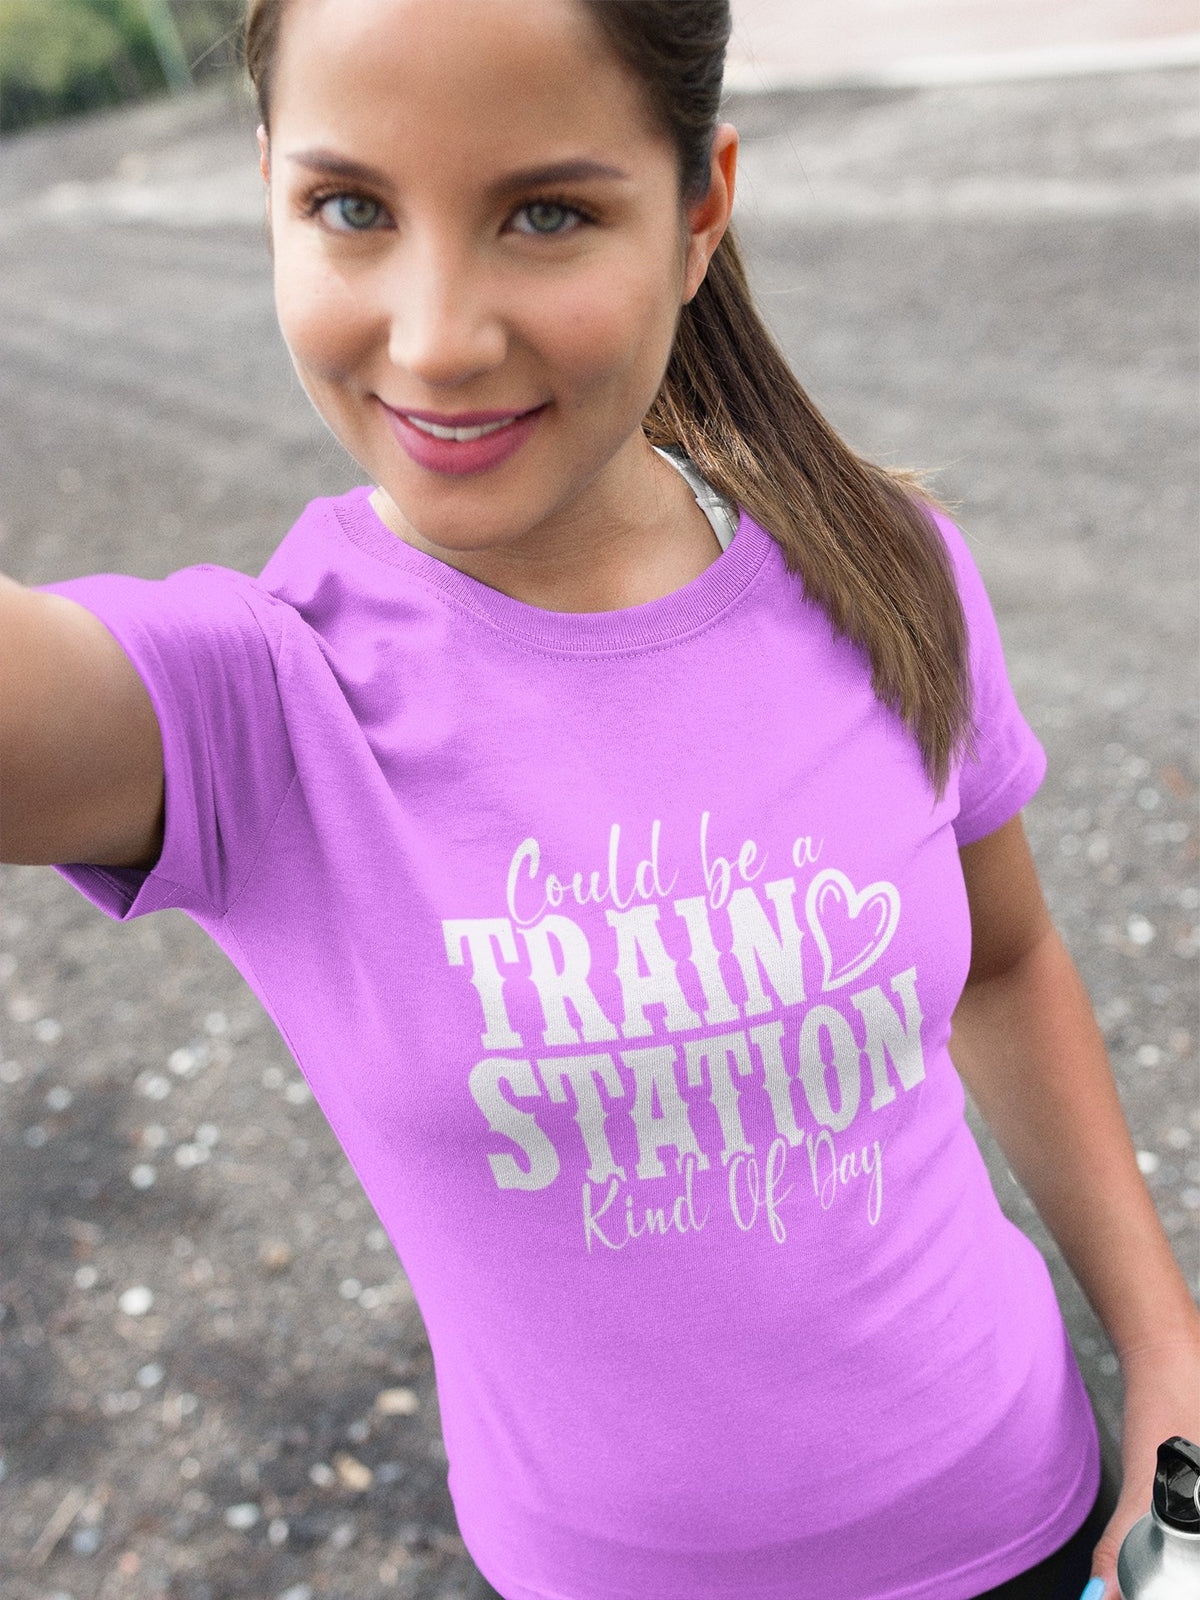 Could be a train station kind of day Women's Short Sleeve Tee - Salty Medic Clothing Co.